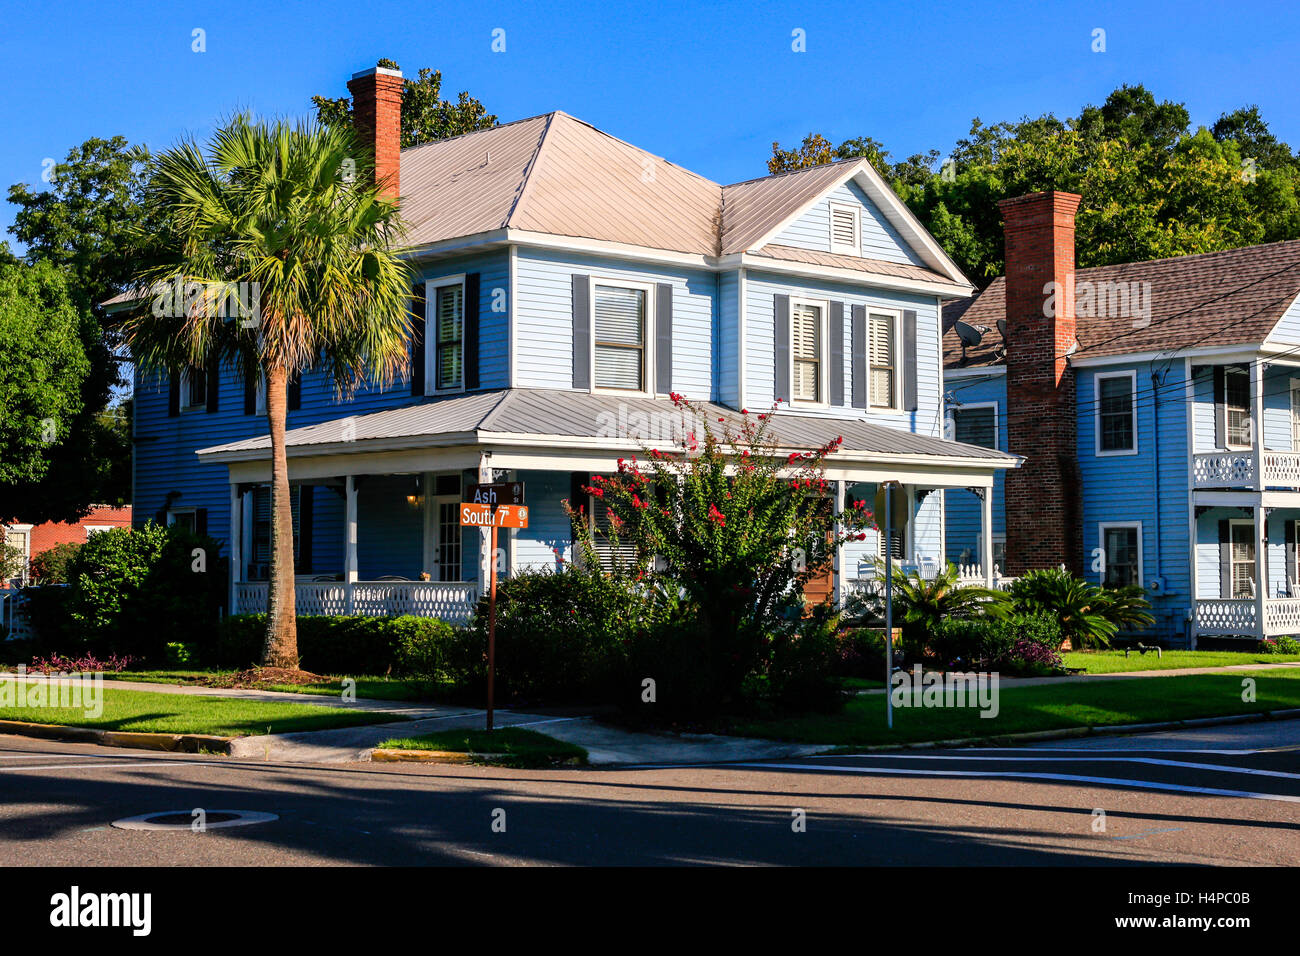 Typical early 20th century homes around Ash and S 7th Streets in the historic district of Fernandina Beach City in Florida Stock Photo